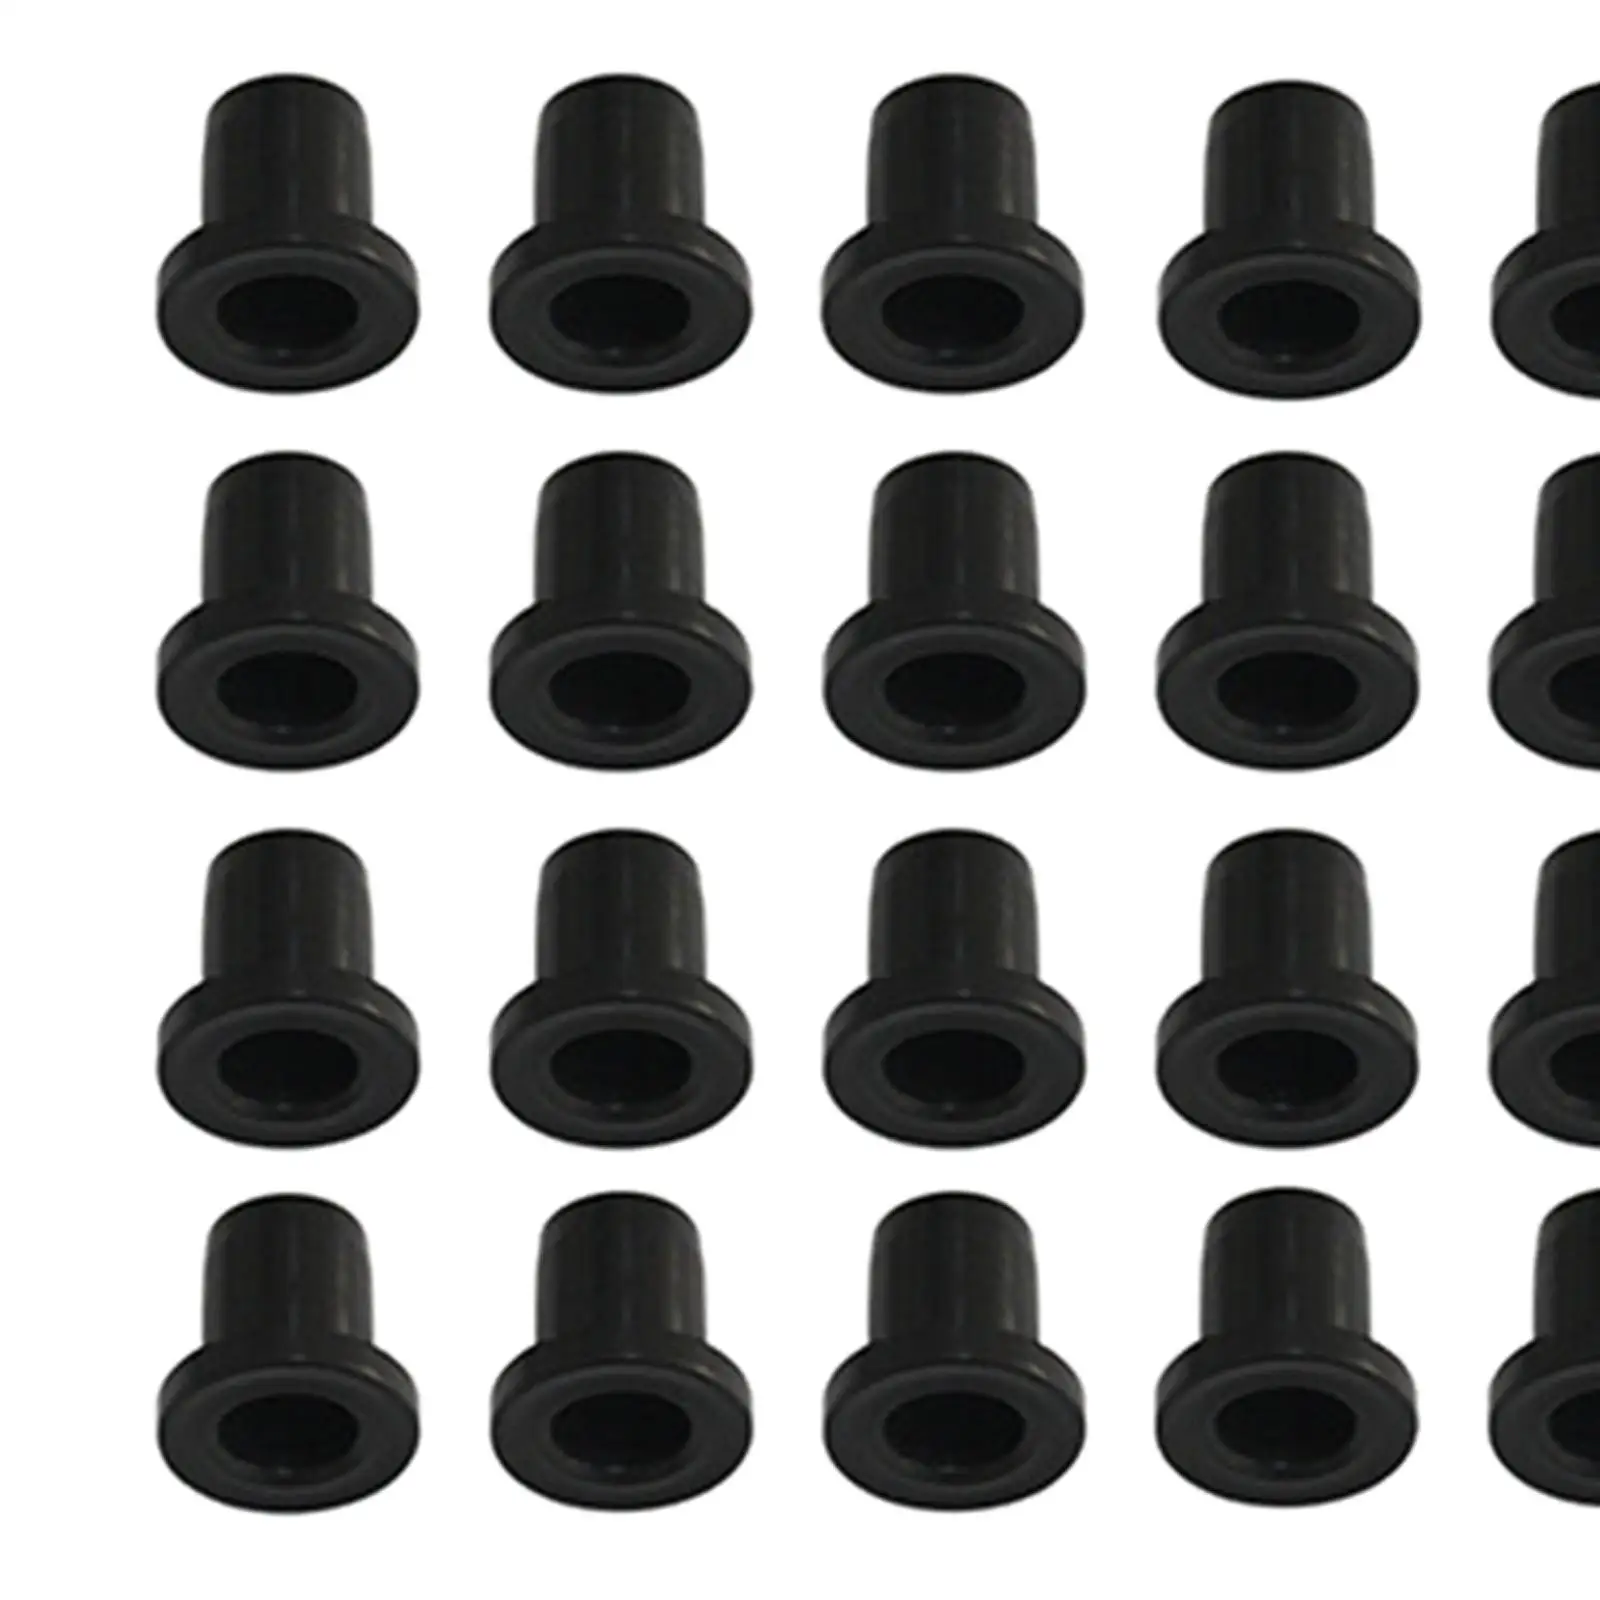 A Arm Bushing Kit Sleeves and Hardware Complete Kit Accessories Control Arm Bushing Kit Replace for Polaris Ranger XP 900